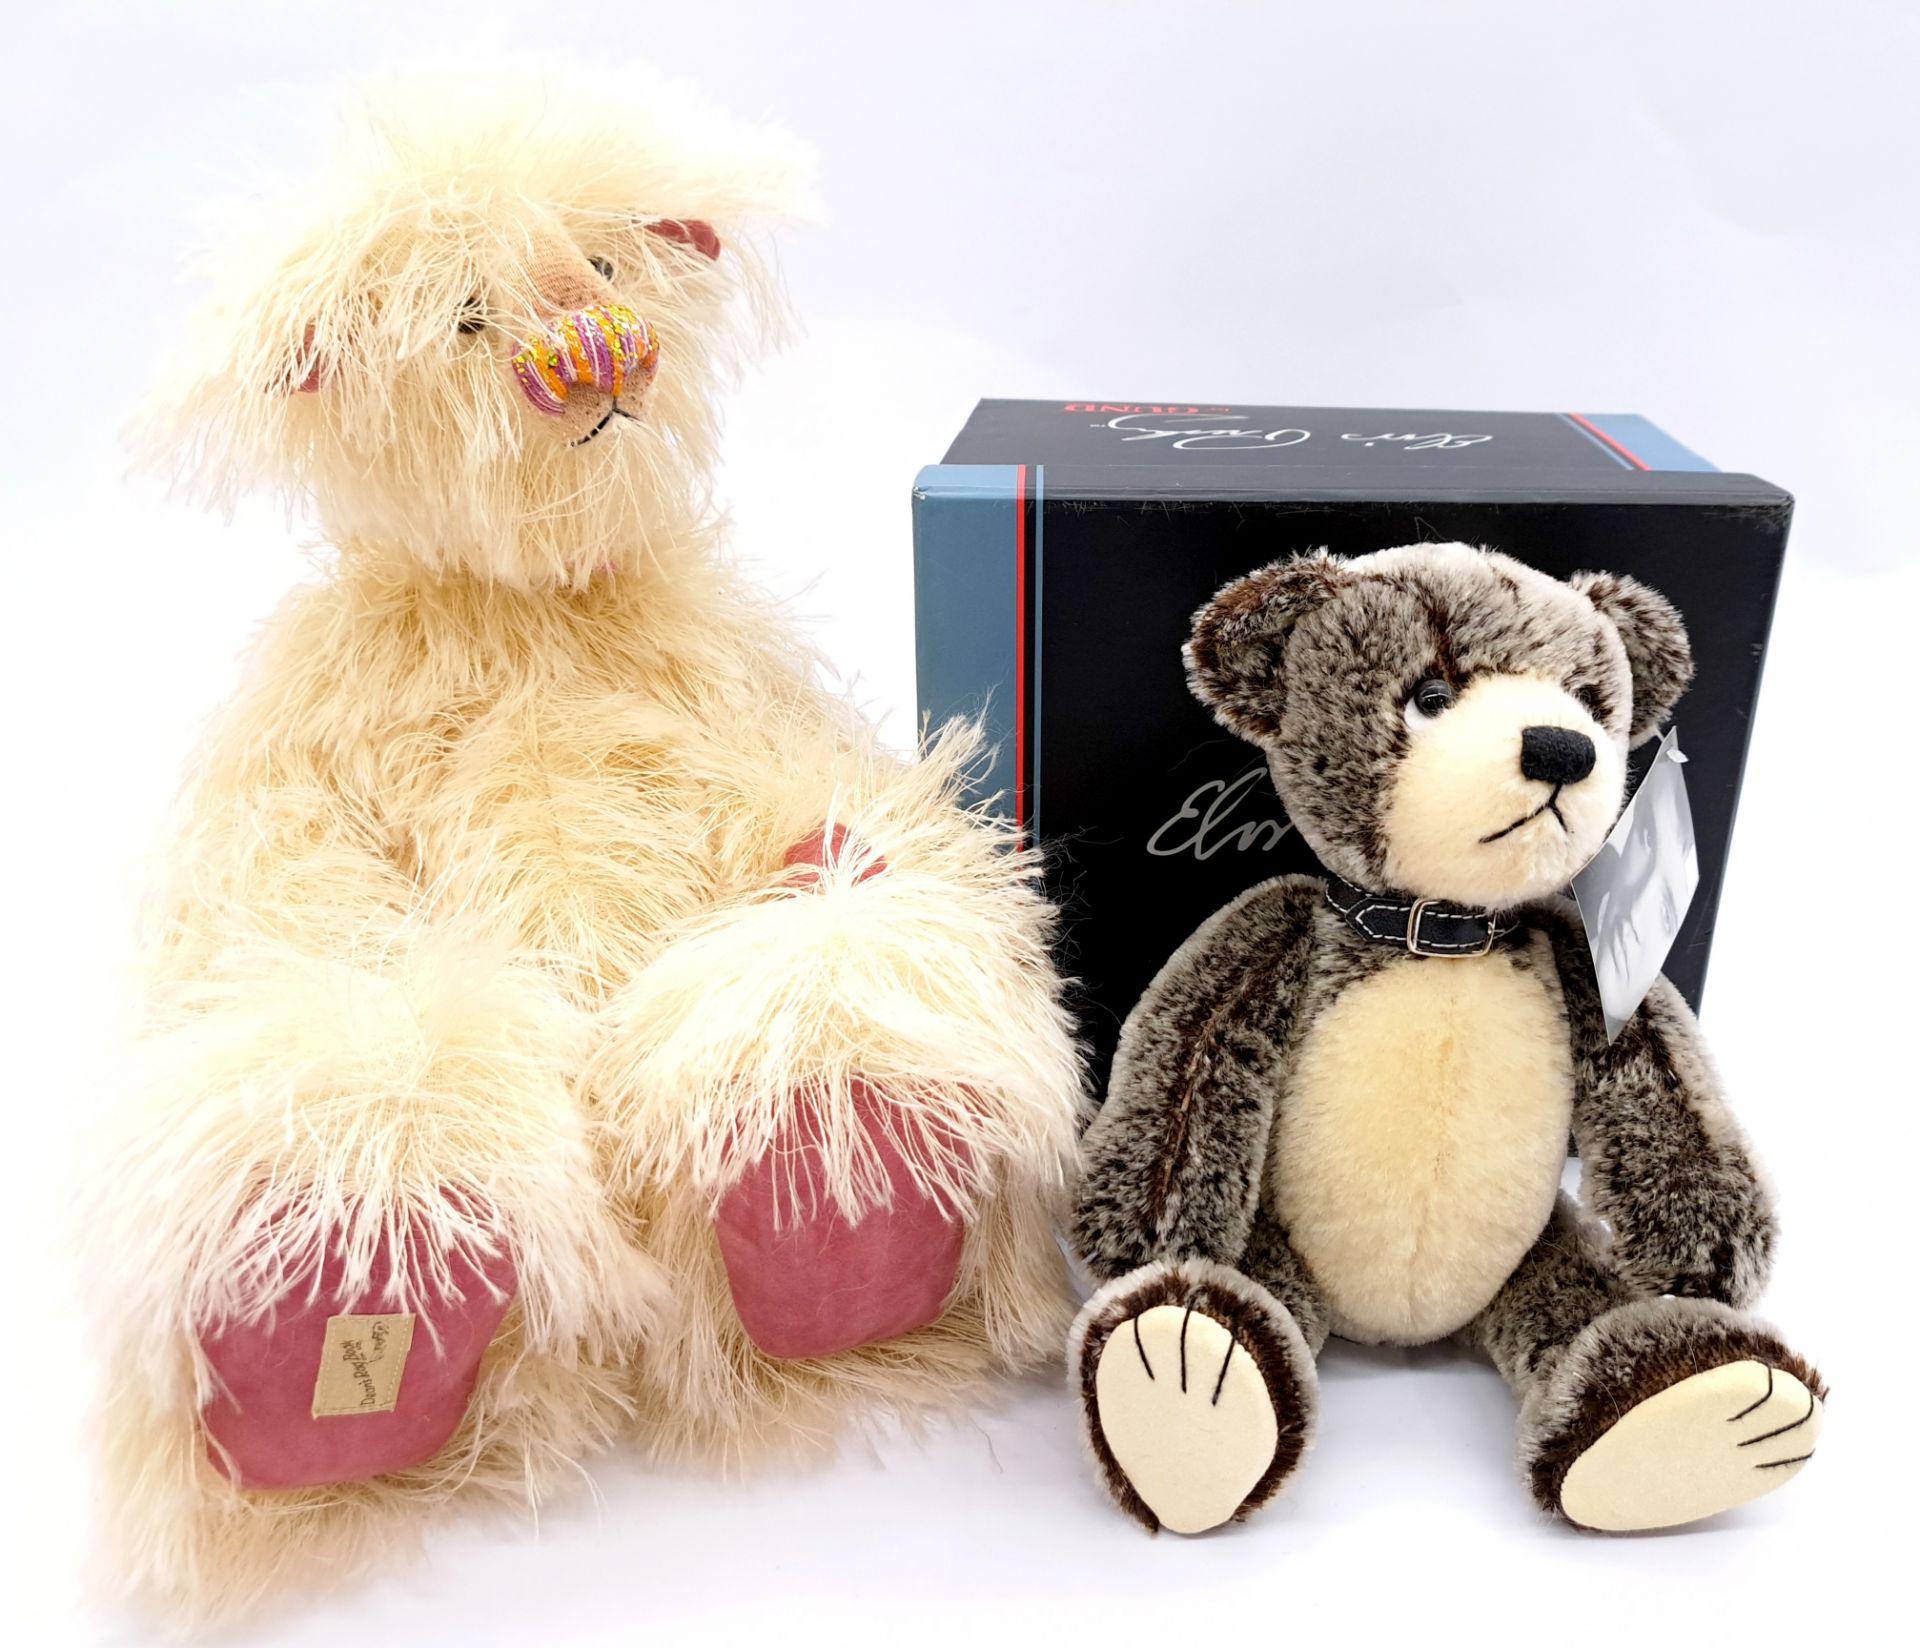 Pair of Dean's and Gund limited edition bears